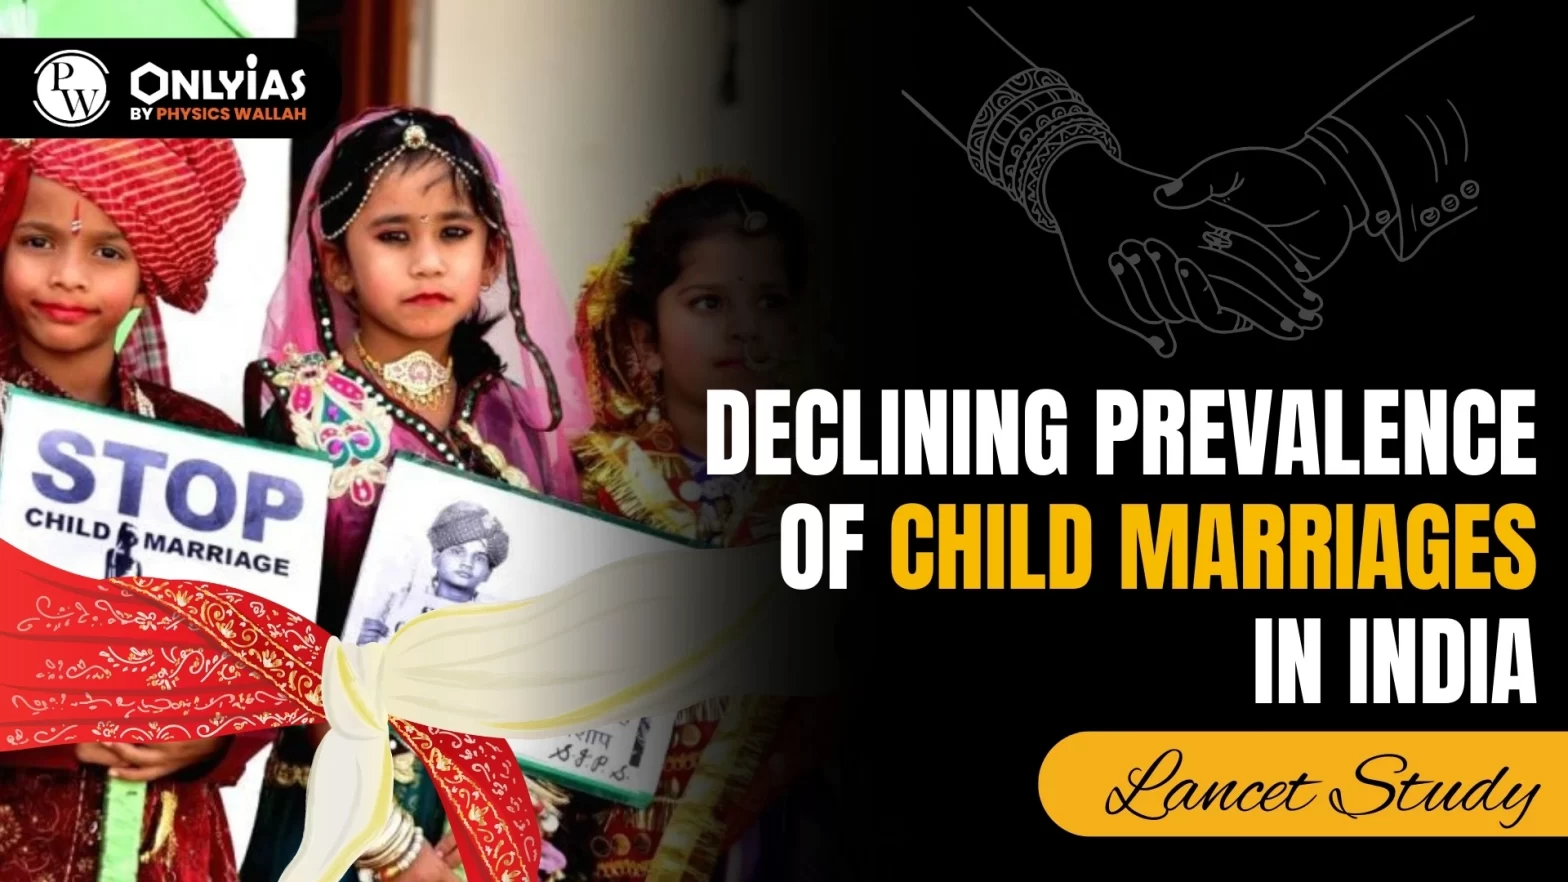 Declining Prevalence of Child Marriages in India: Lancet Study